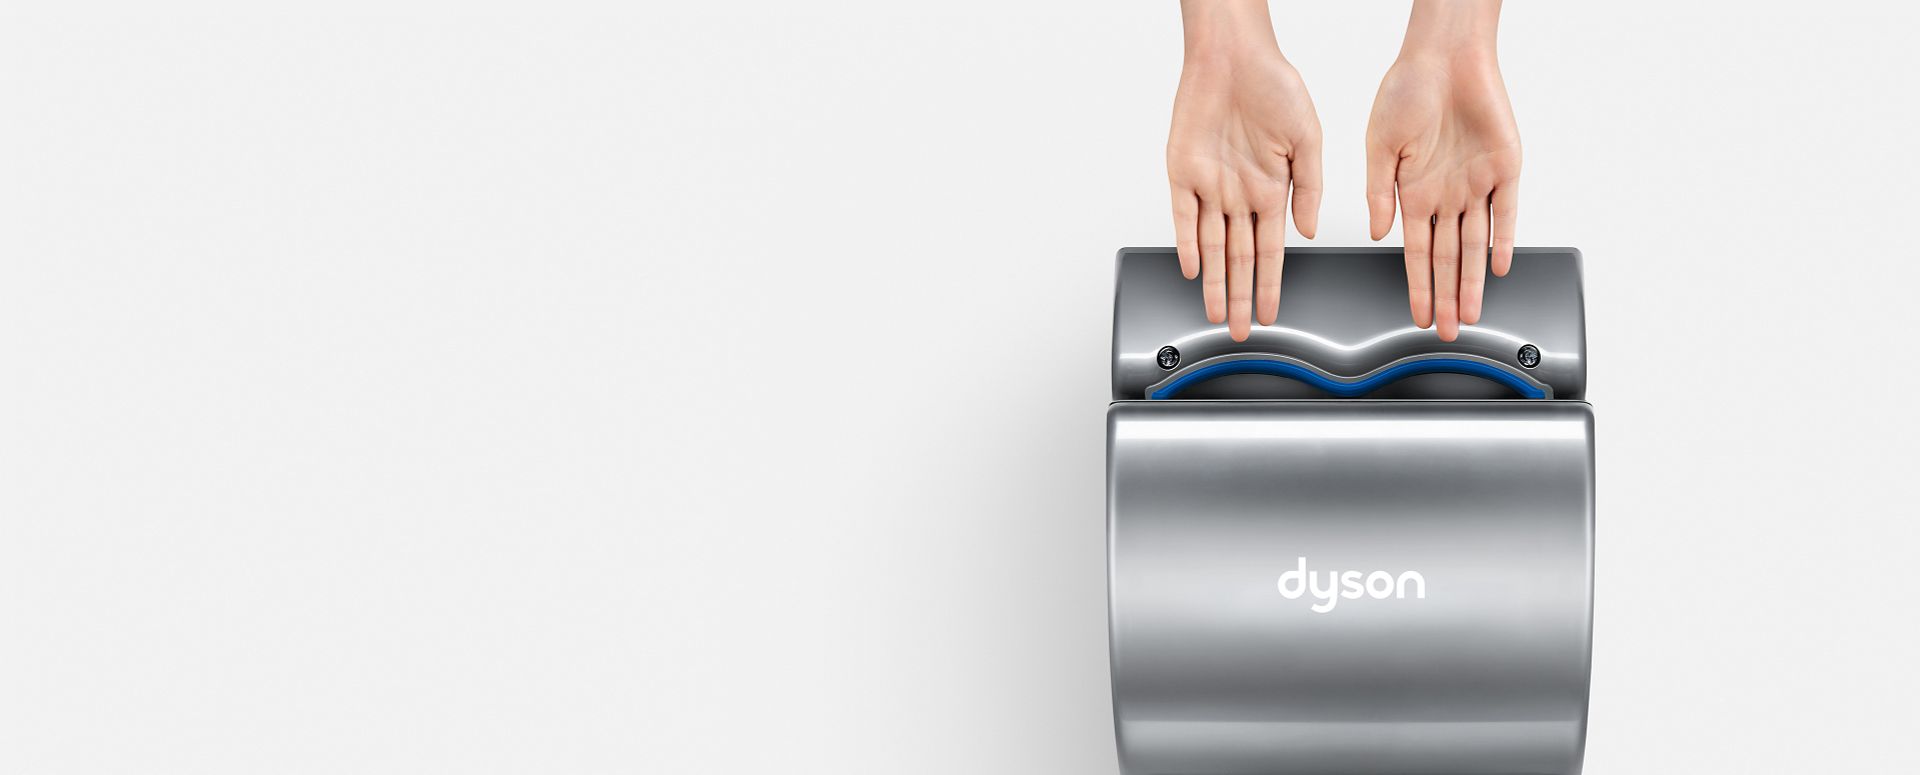 Dyson Airblade Hand Dryers The Best Hand Of 2018